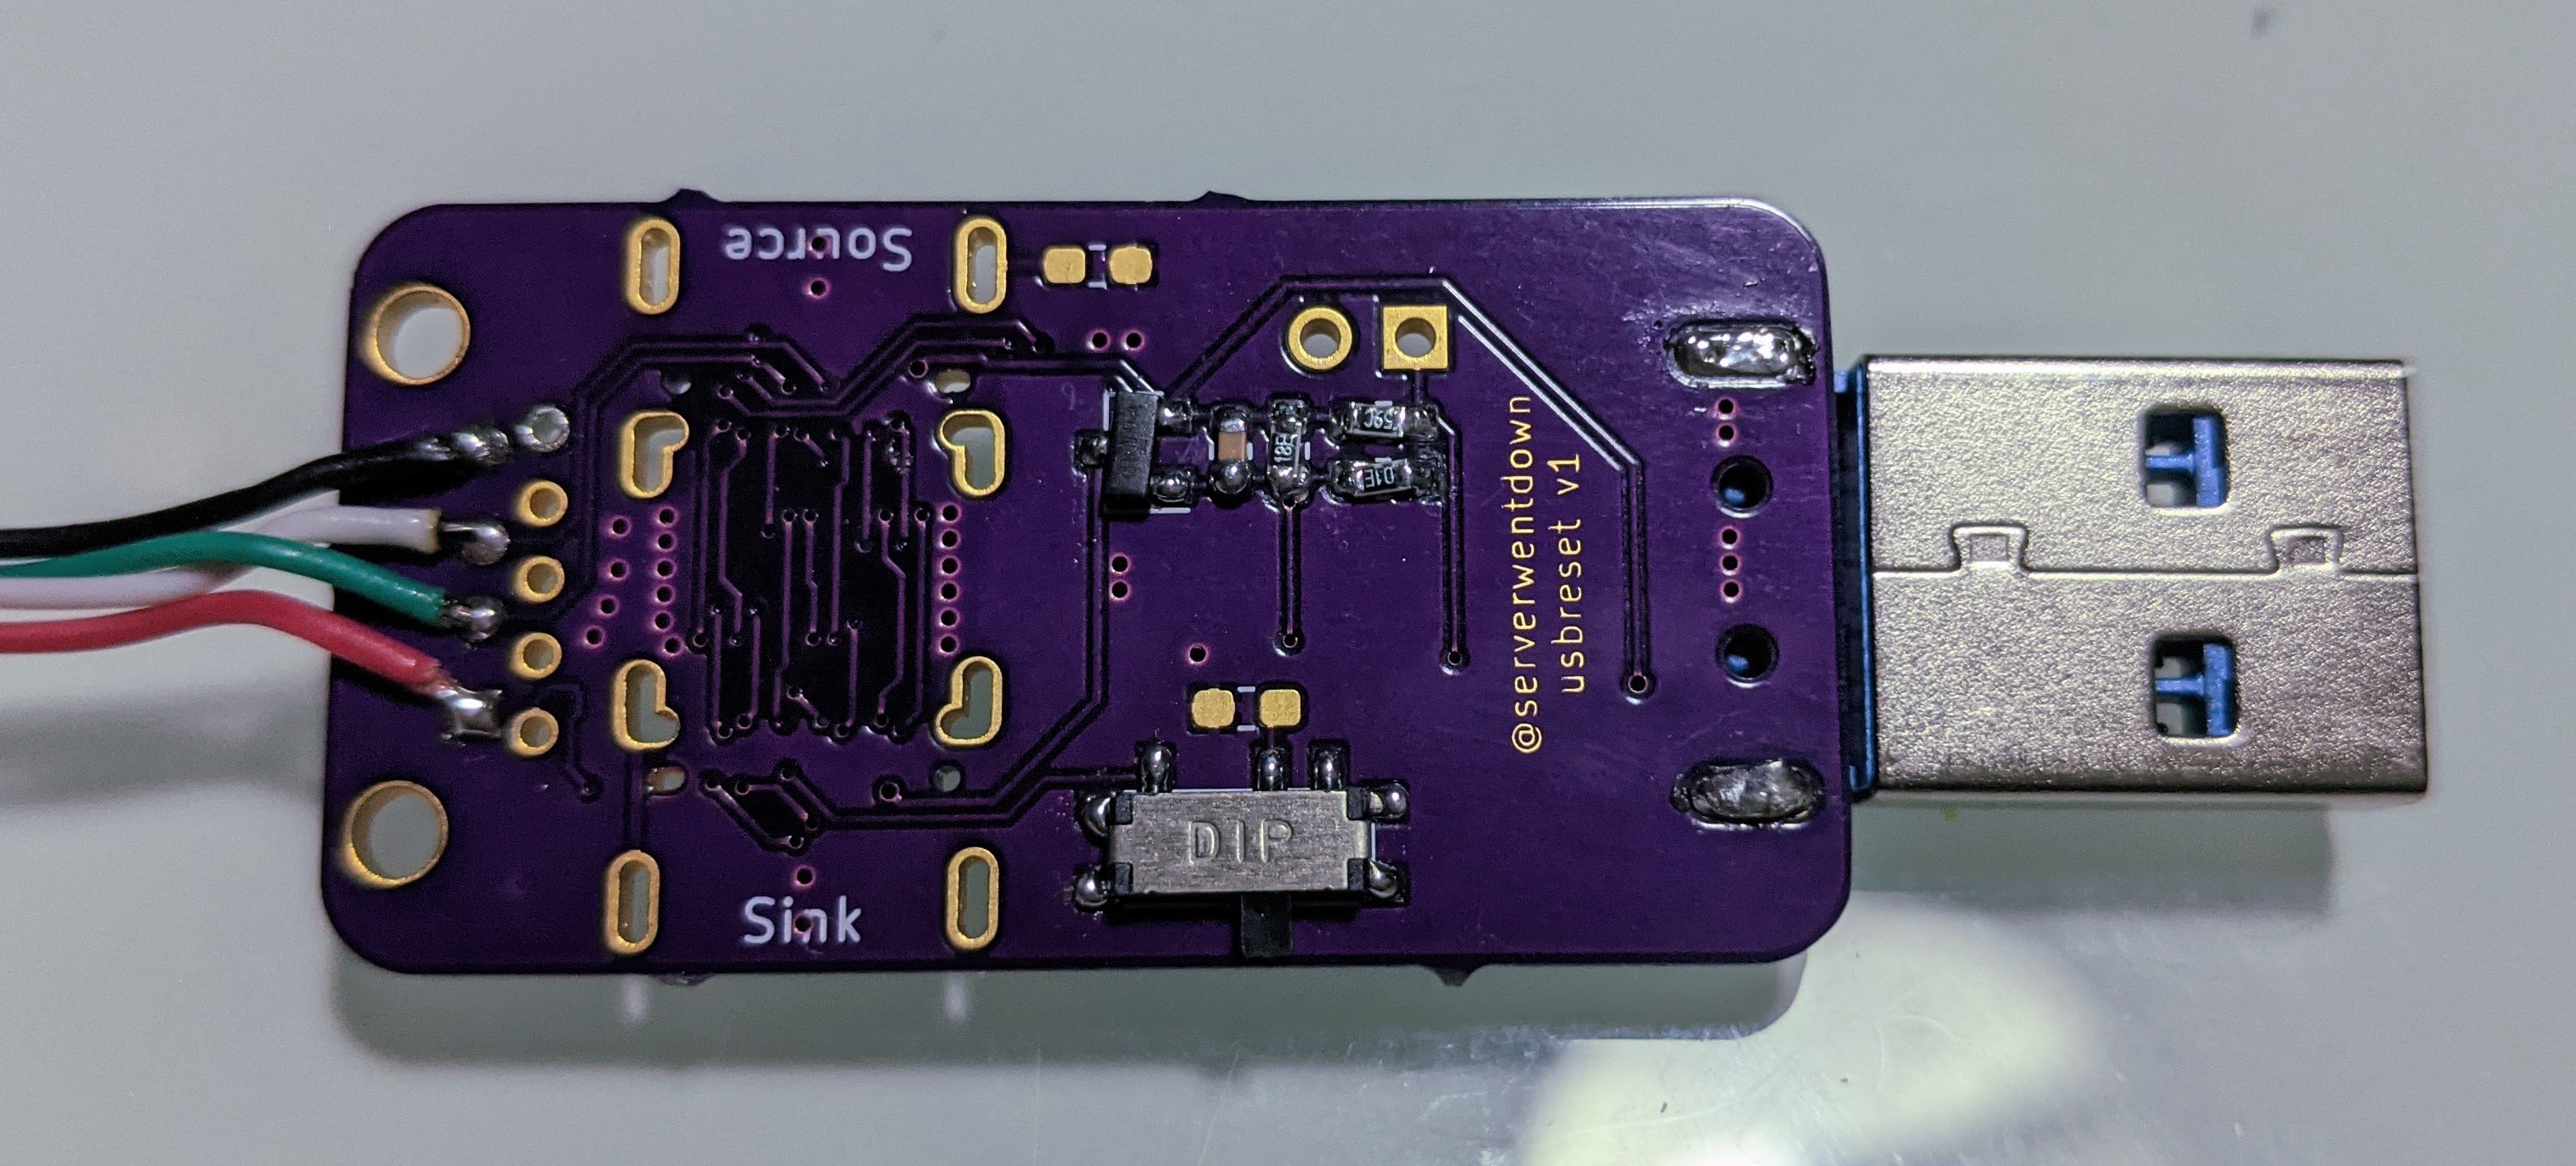 Physical partially-soldered board